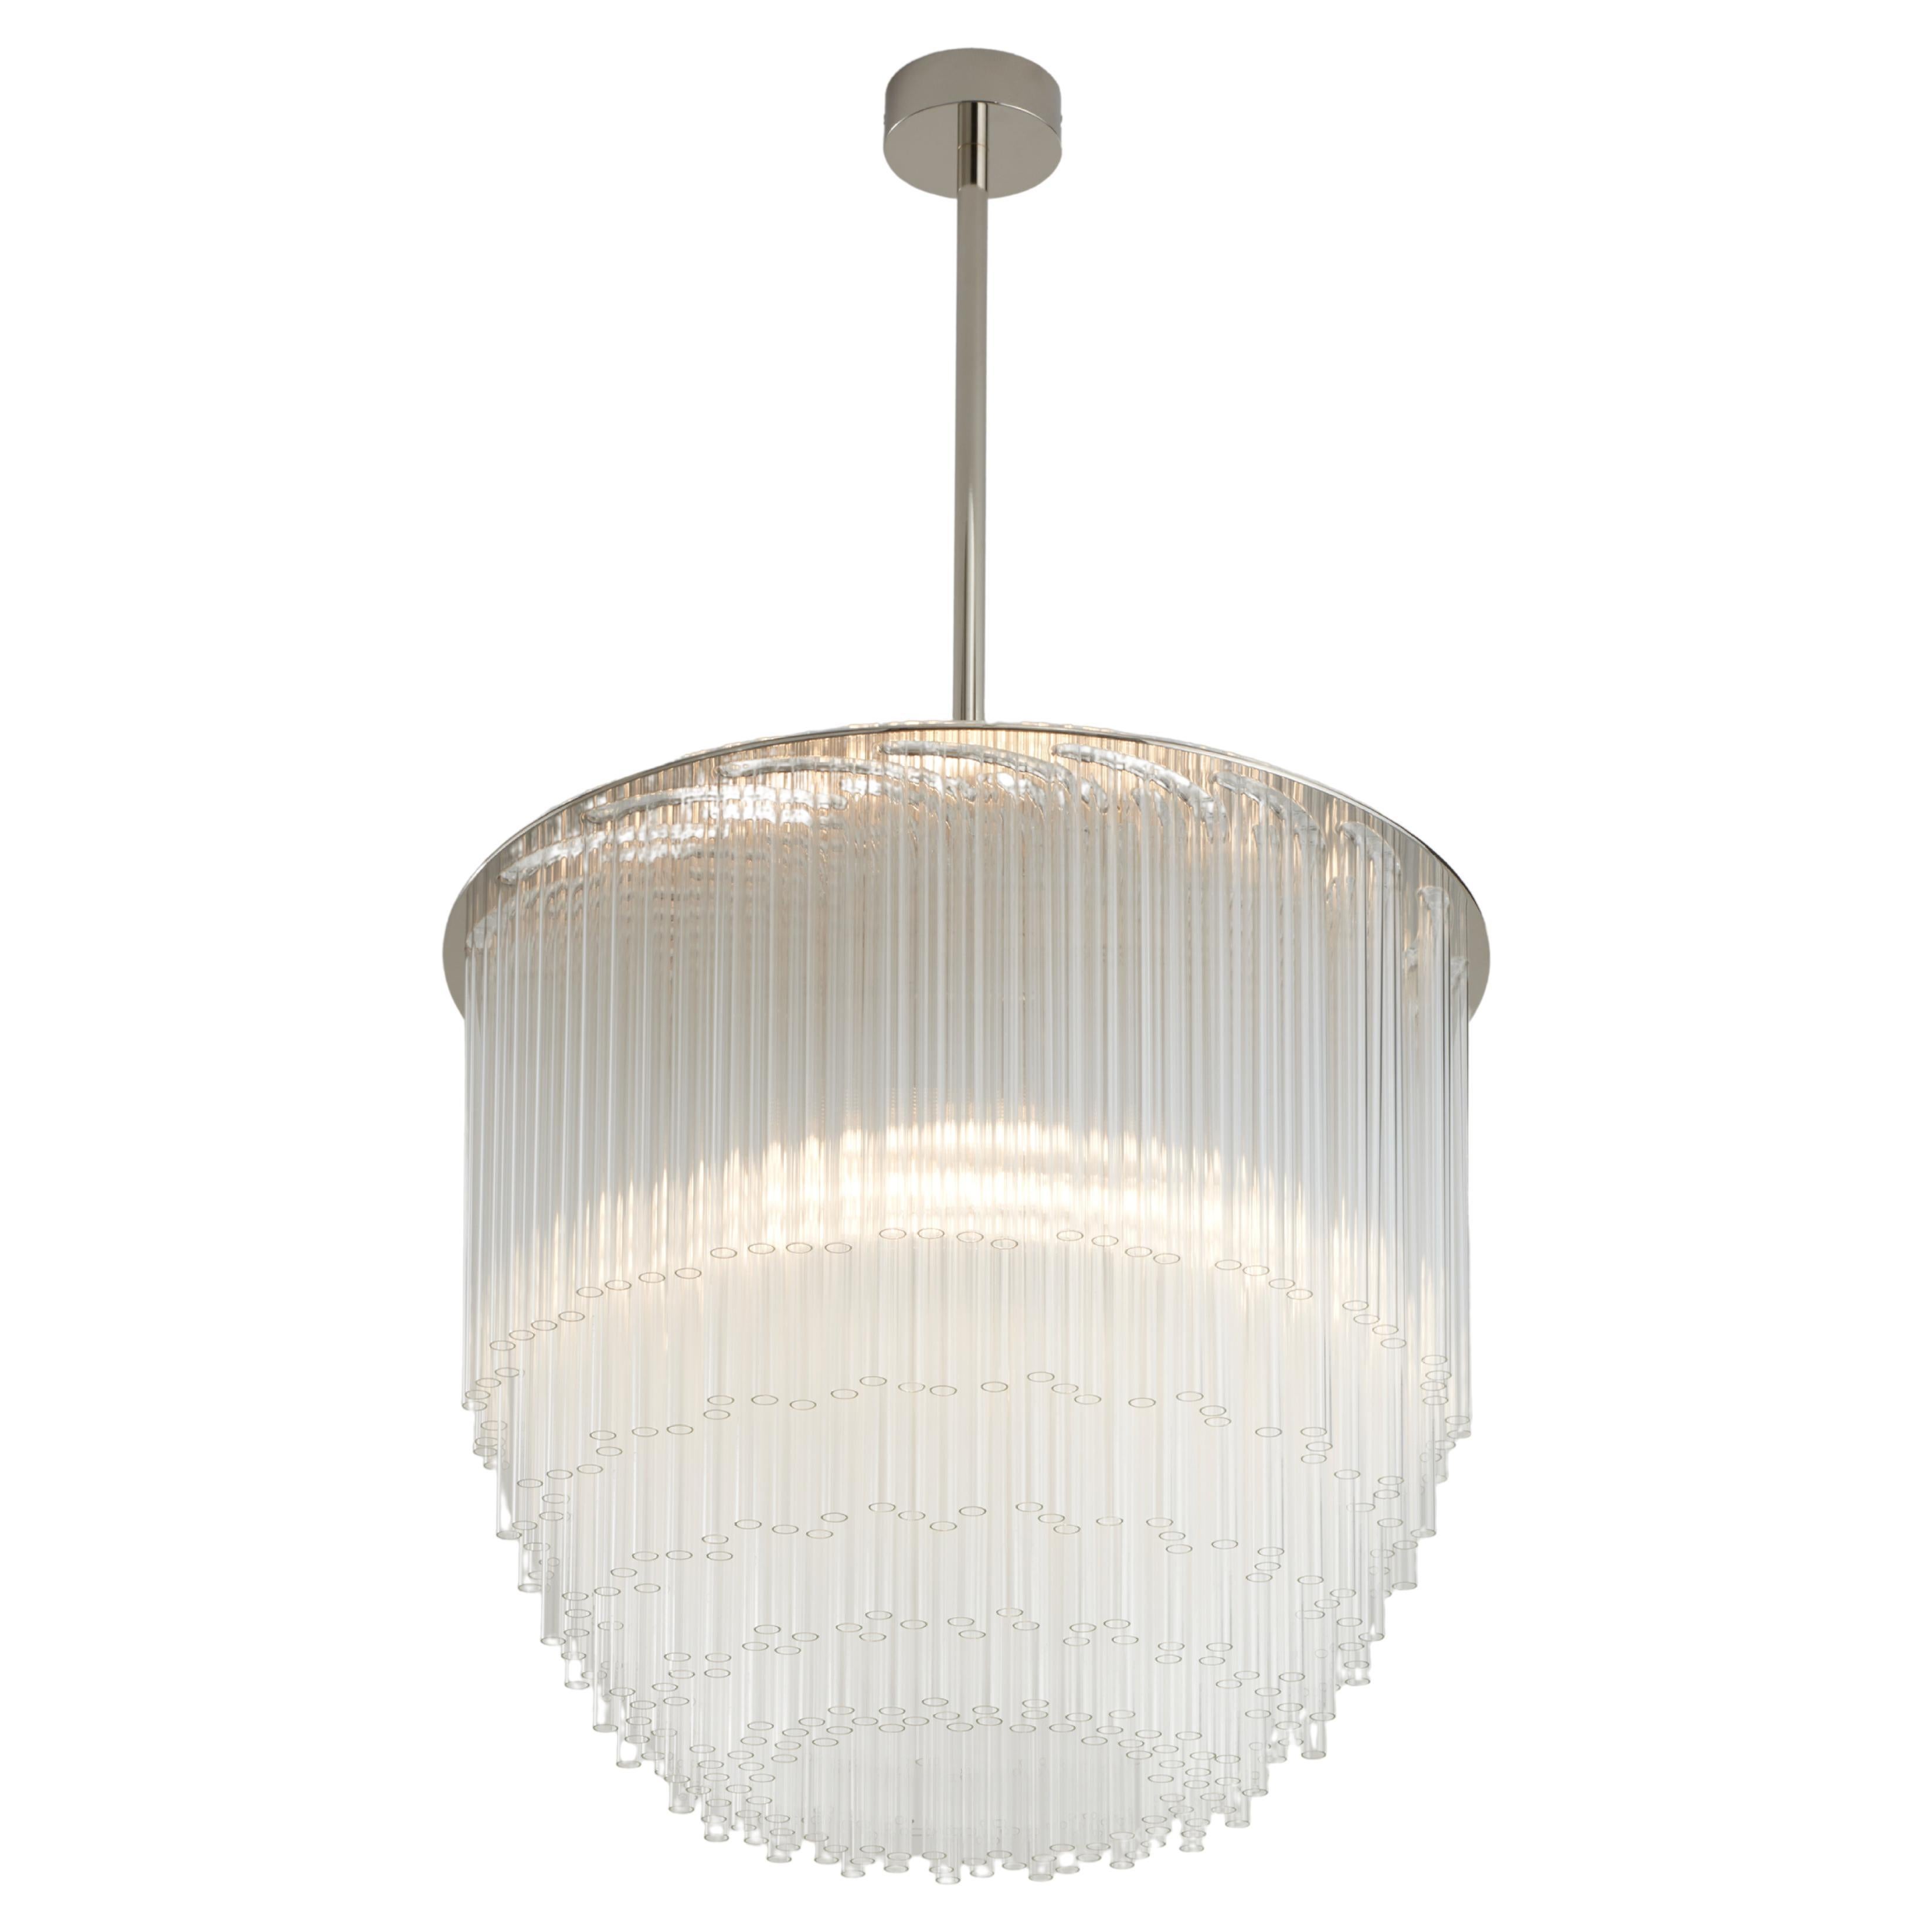 Disc Chandelier 500mm / 19.75" in Polished Nickel, UL Listed For Sale